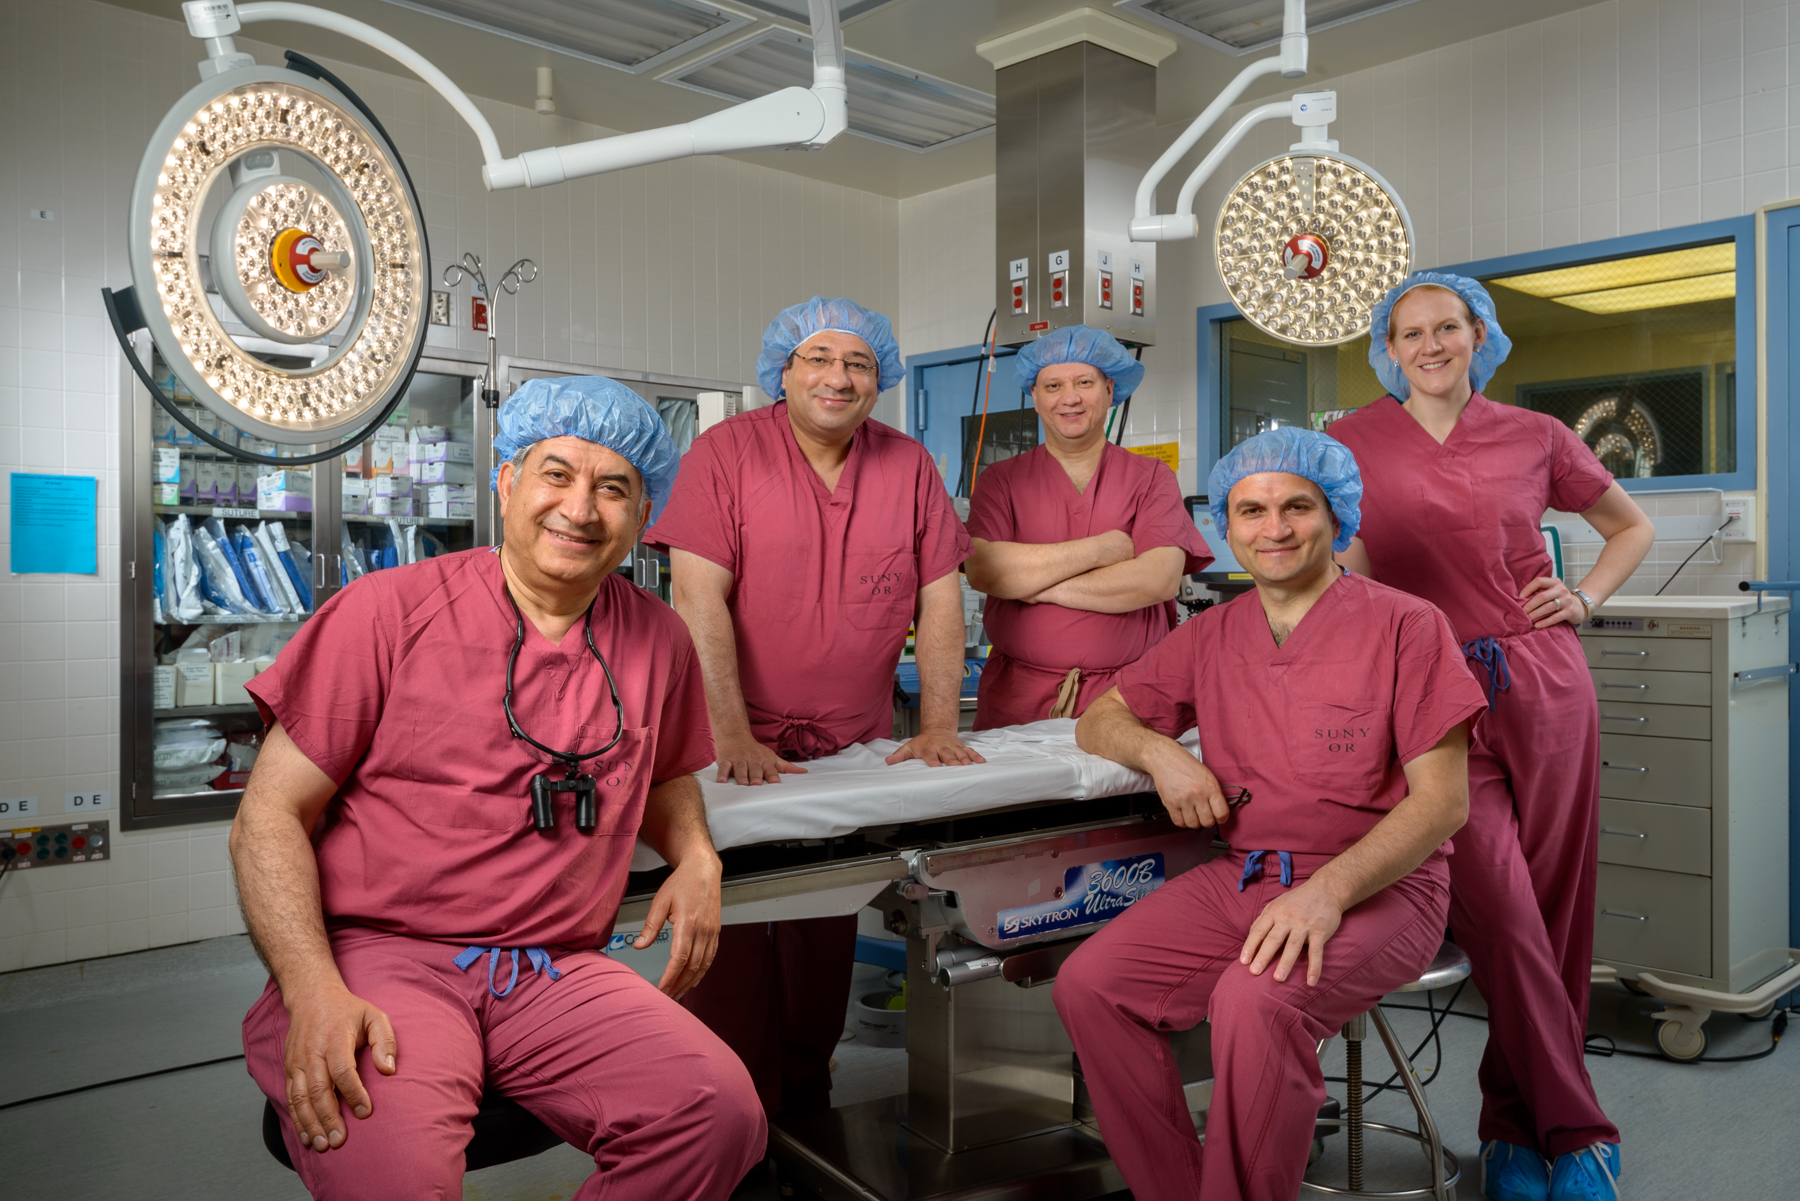 The transplant surgery team, from left: Mark Laftavi, MD, Tamer Malik, MBBCh, Zeki Acun, MD, Rauf Shahbazov, MD, and physician assistant Sharon Denise. (Photo by Robert Mescavage)